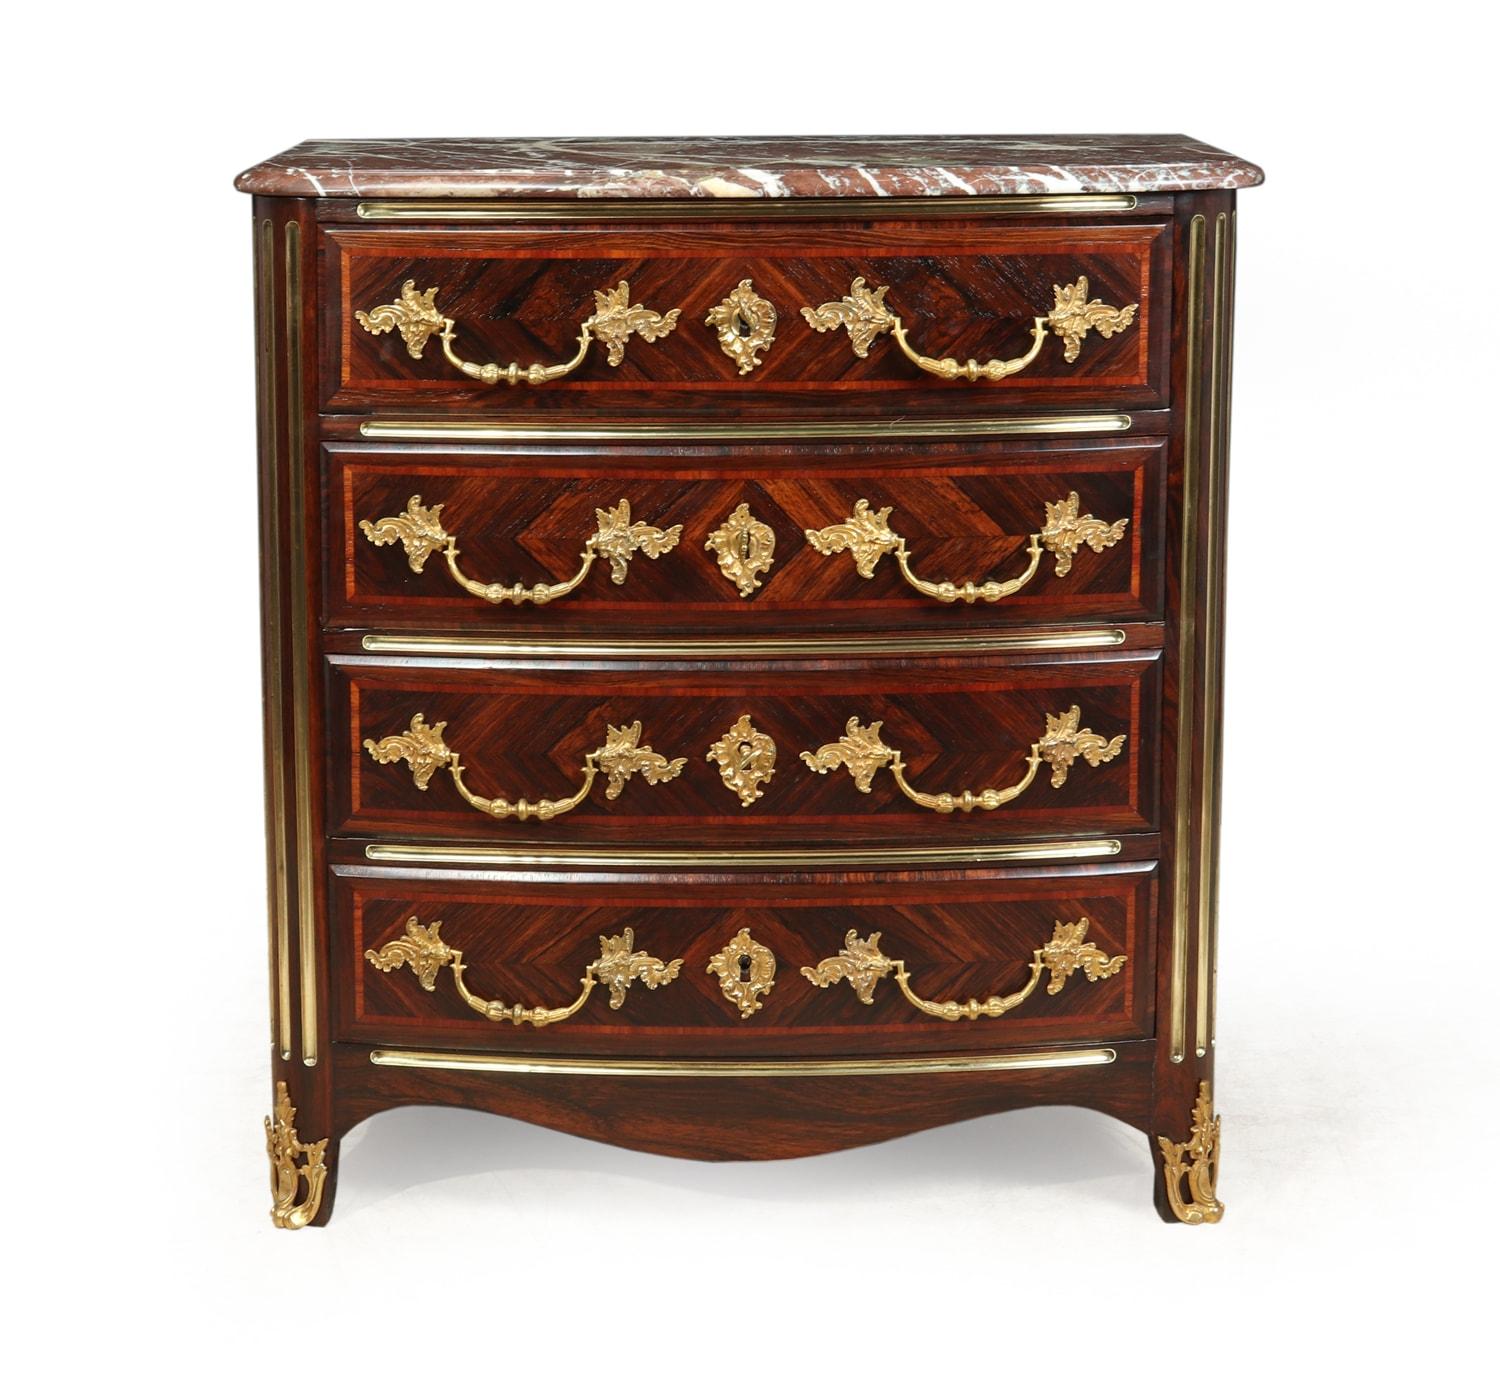 Antique French commode chest of drawers circa 1880

A small antique bow shaped front chest of four long drawers with shaped rouge breccia marble,
gilt bronze gilt ormolu feet, Handles and escutcheons , brass inlay corners and drawer slides, it